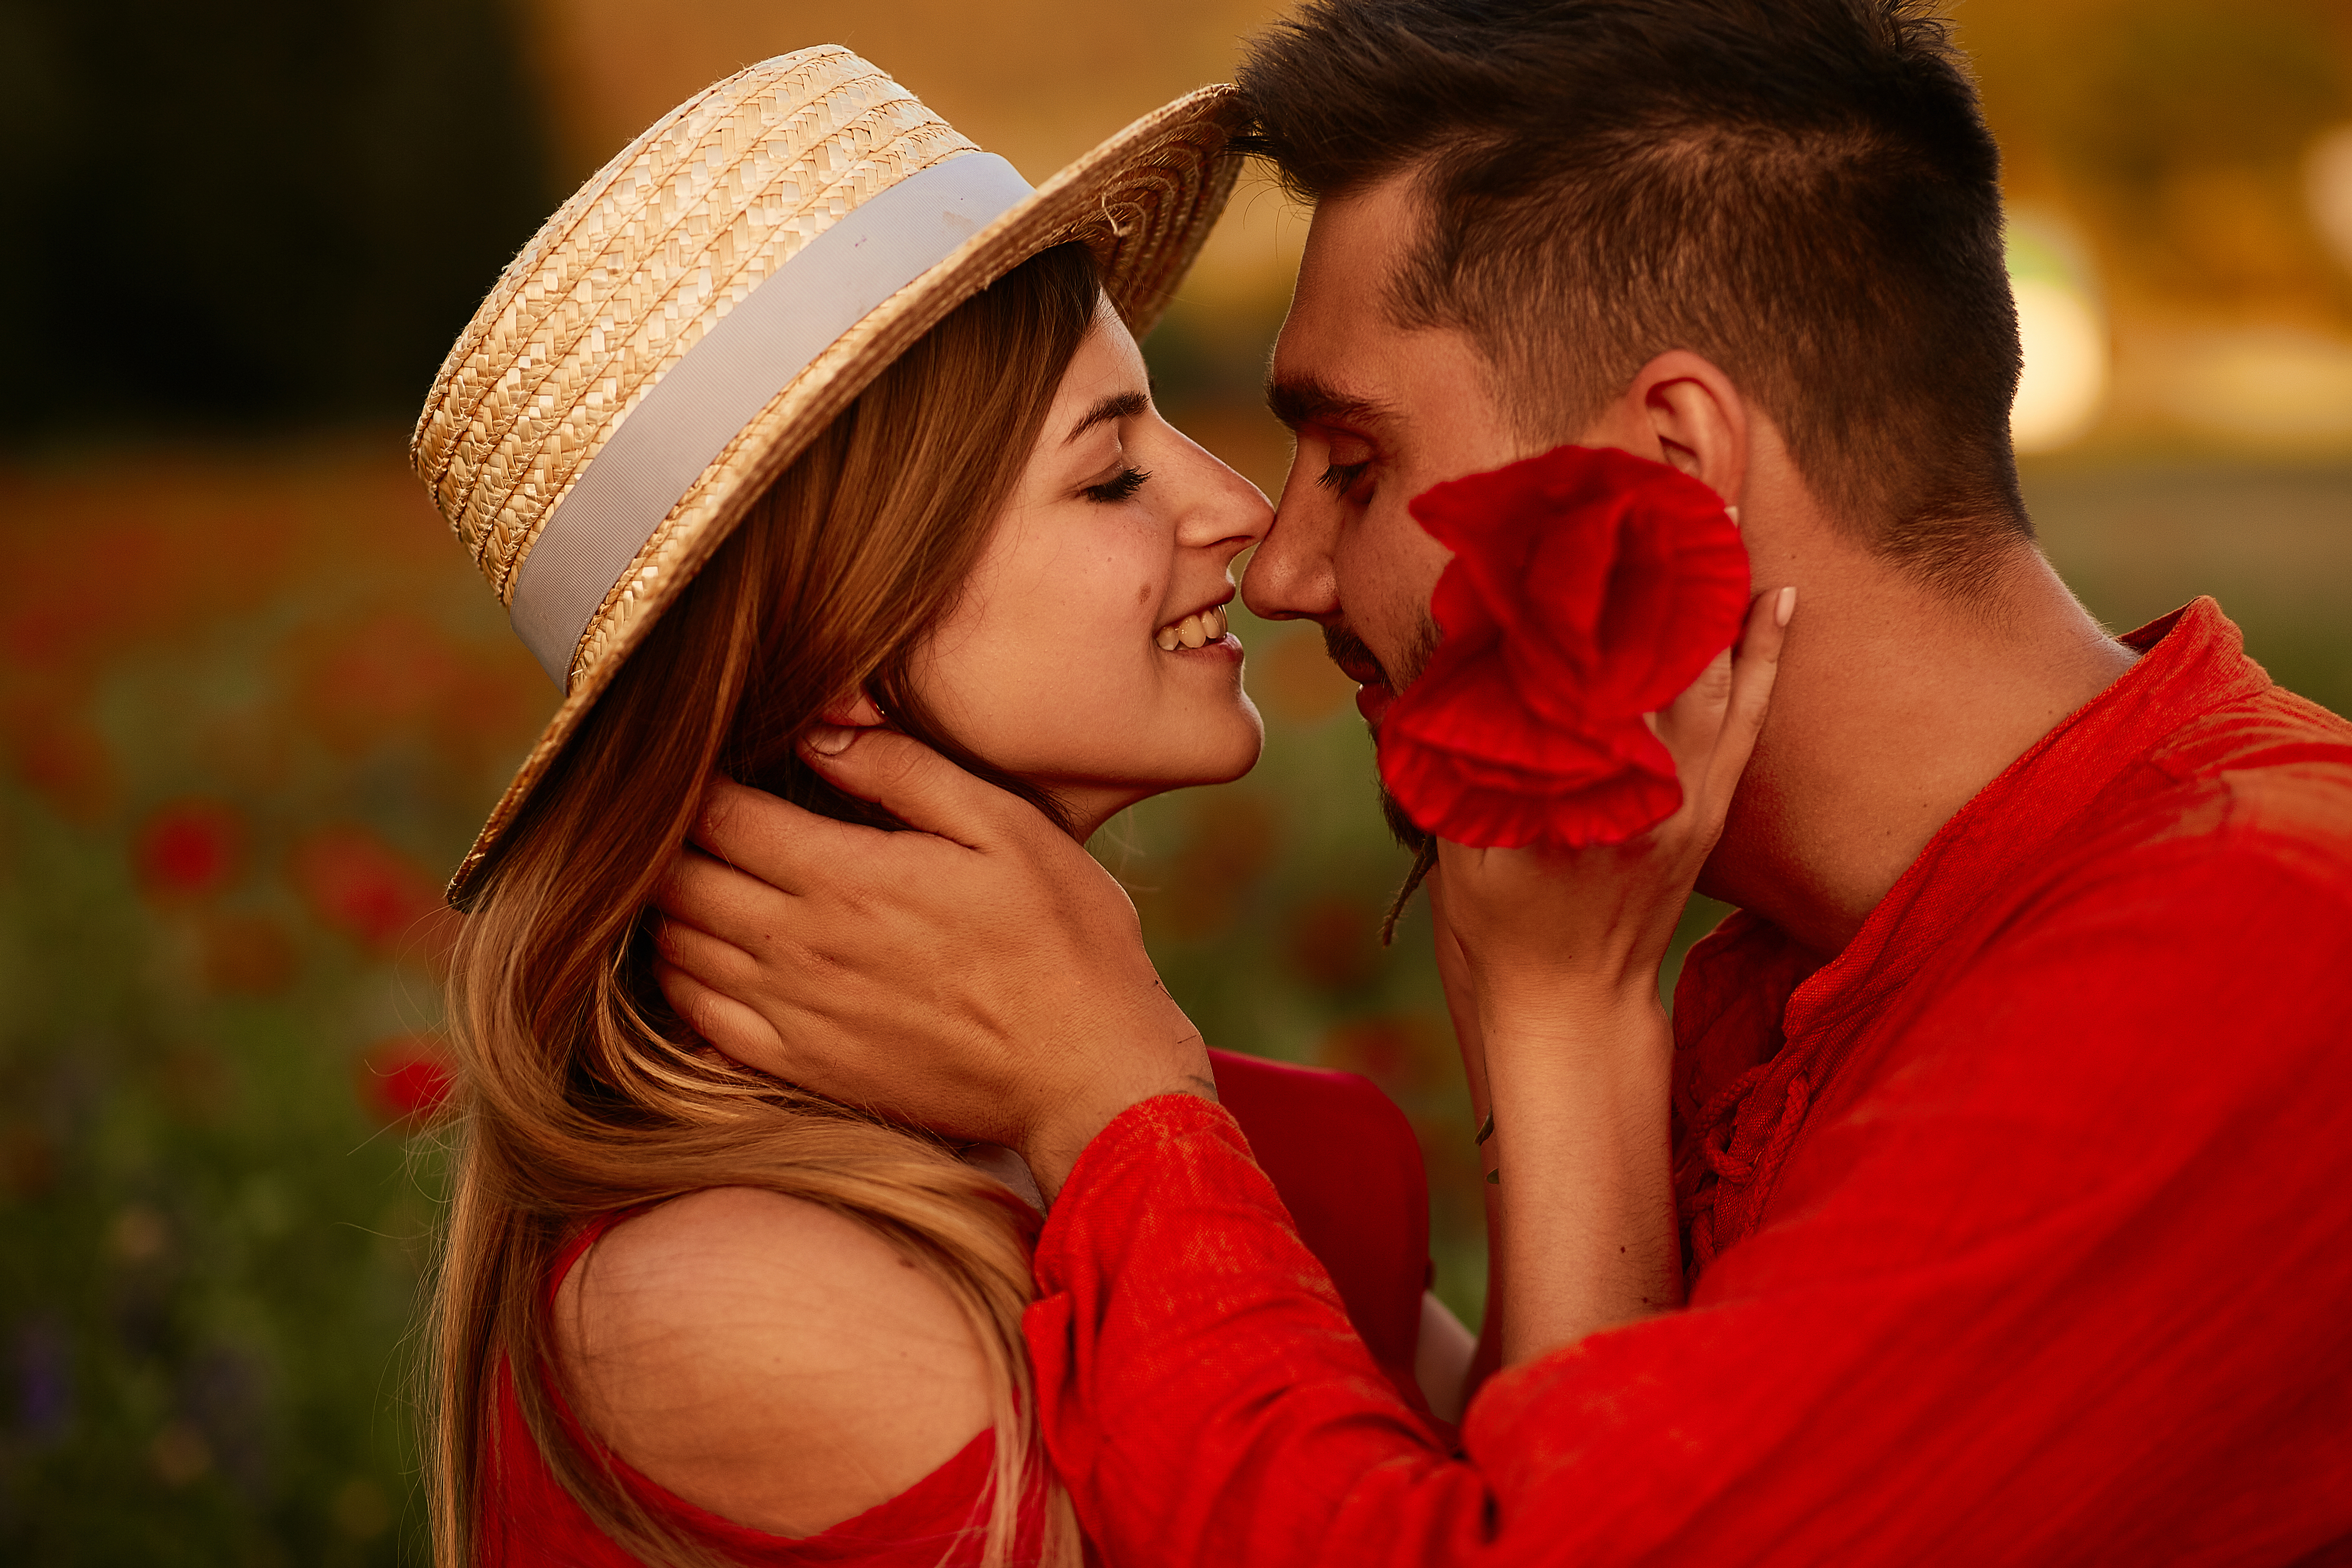 Men_Love_Couples_in_love_Two_Brown_haired_Hat_556561_4800x3200.jpg